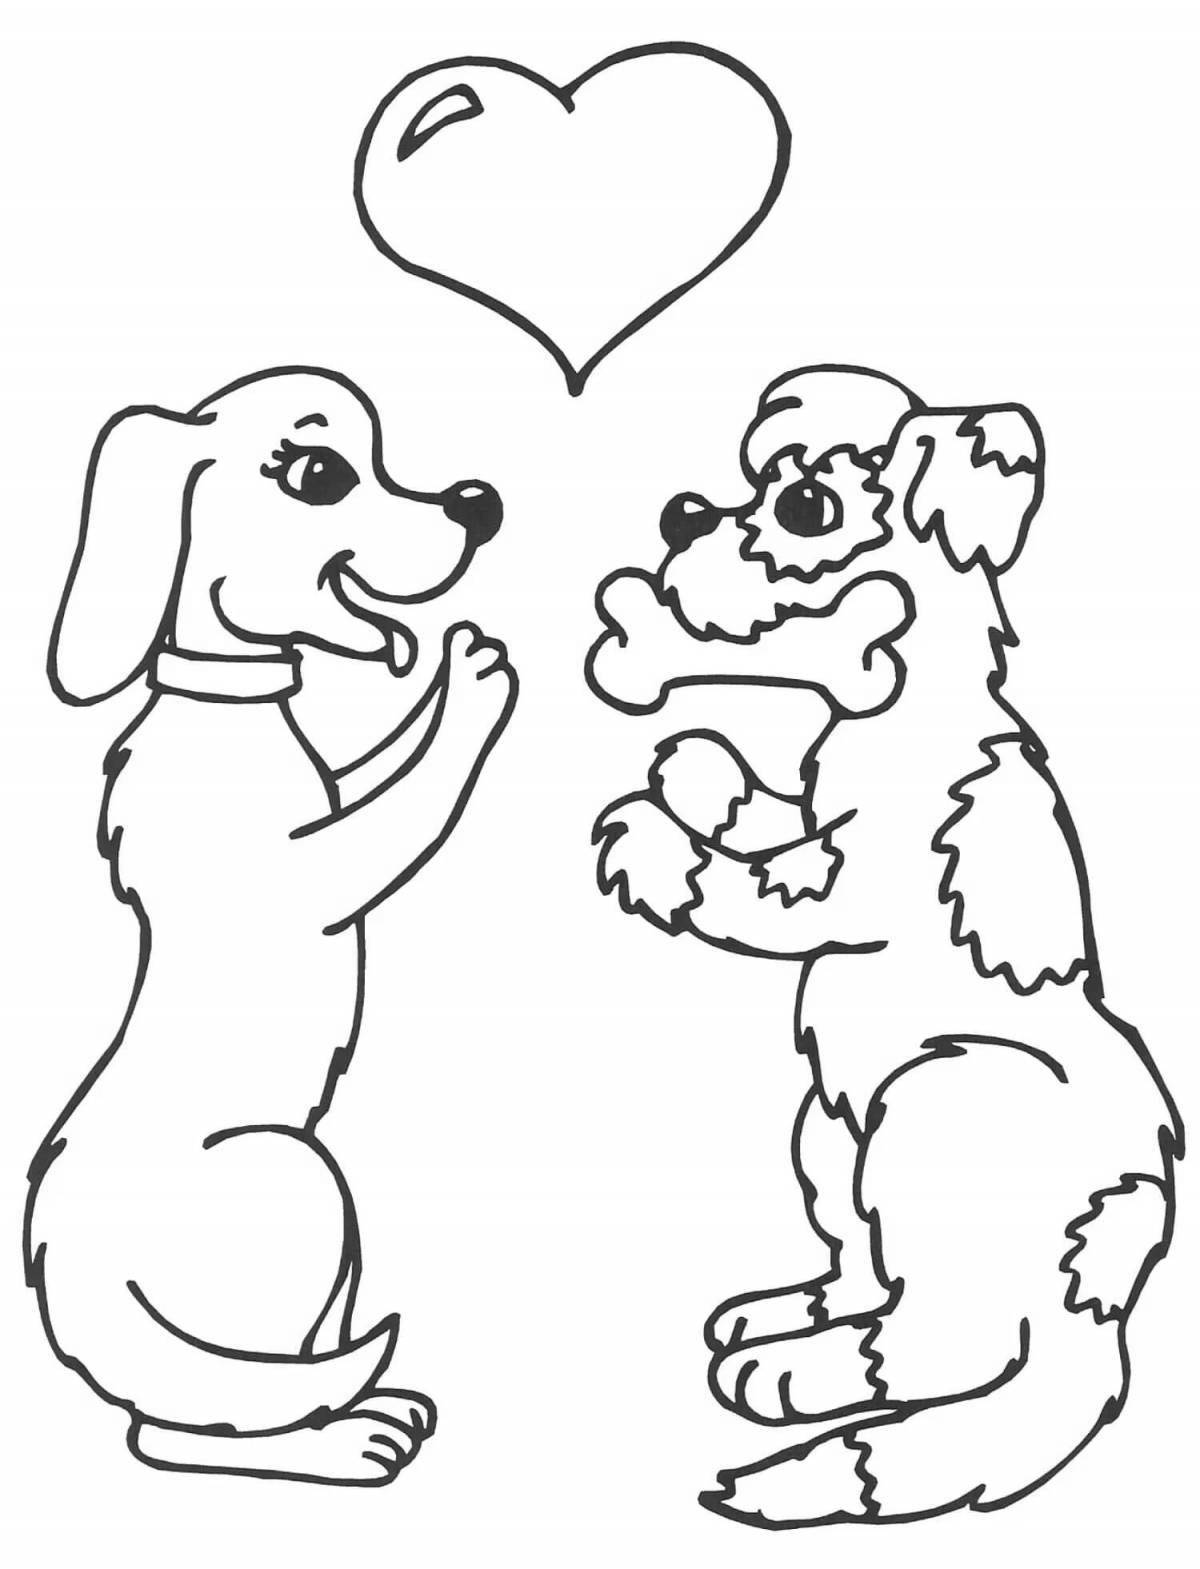 Cat and Dog Live Coloring Page